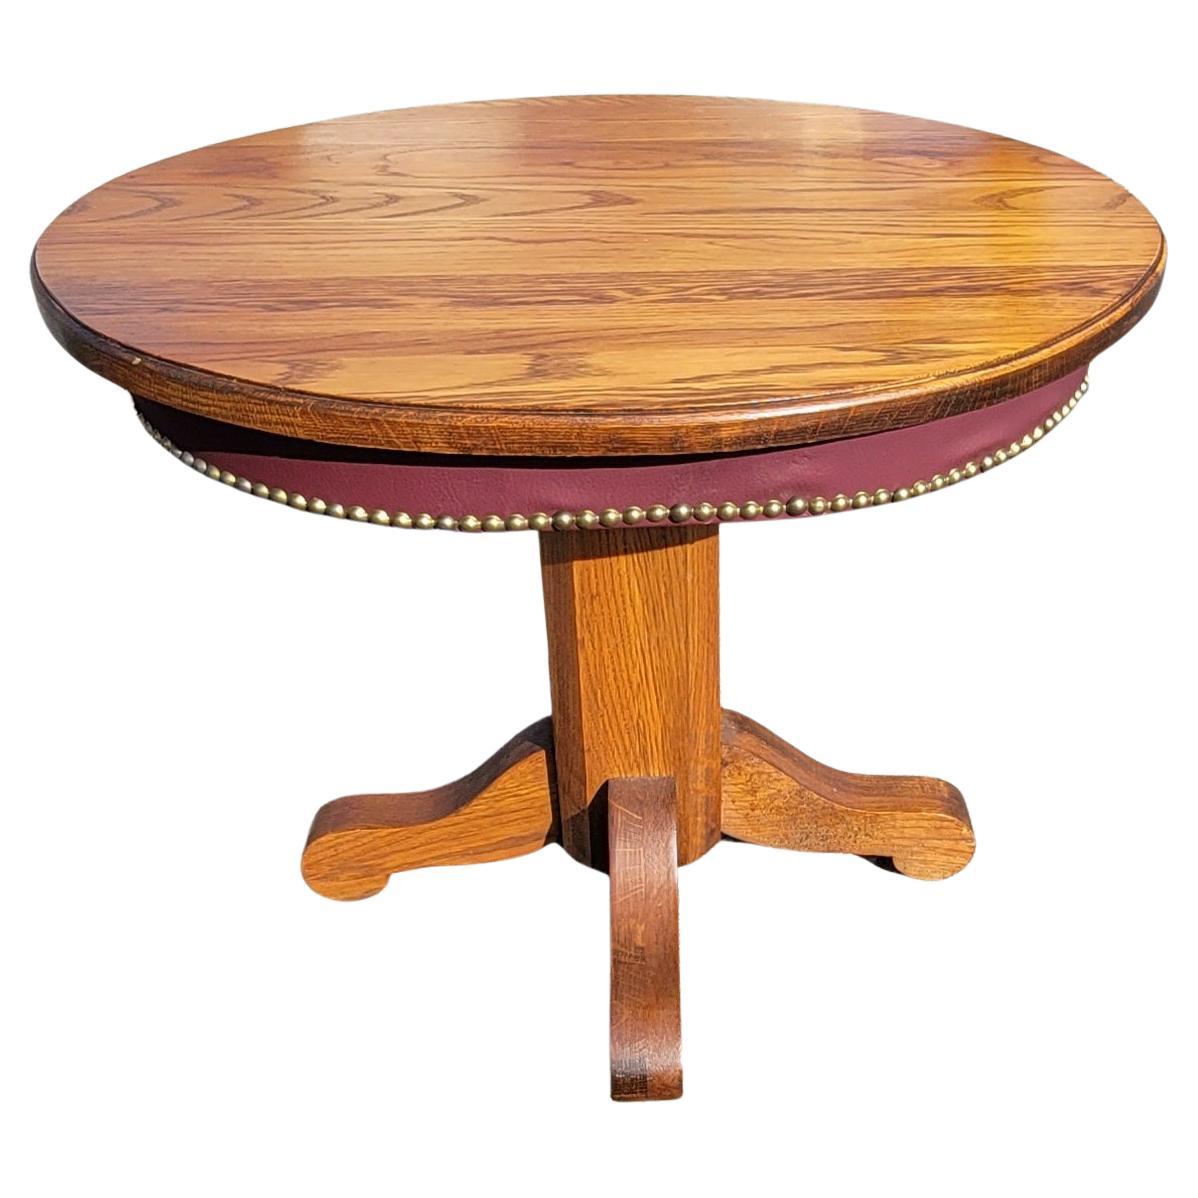 American Mission Oak Pedestal Oval Side Tables W Leatherette Nail Trim Apron In Good Condition For Sale In Germantown, MD